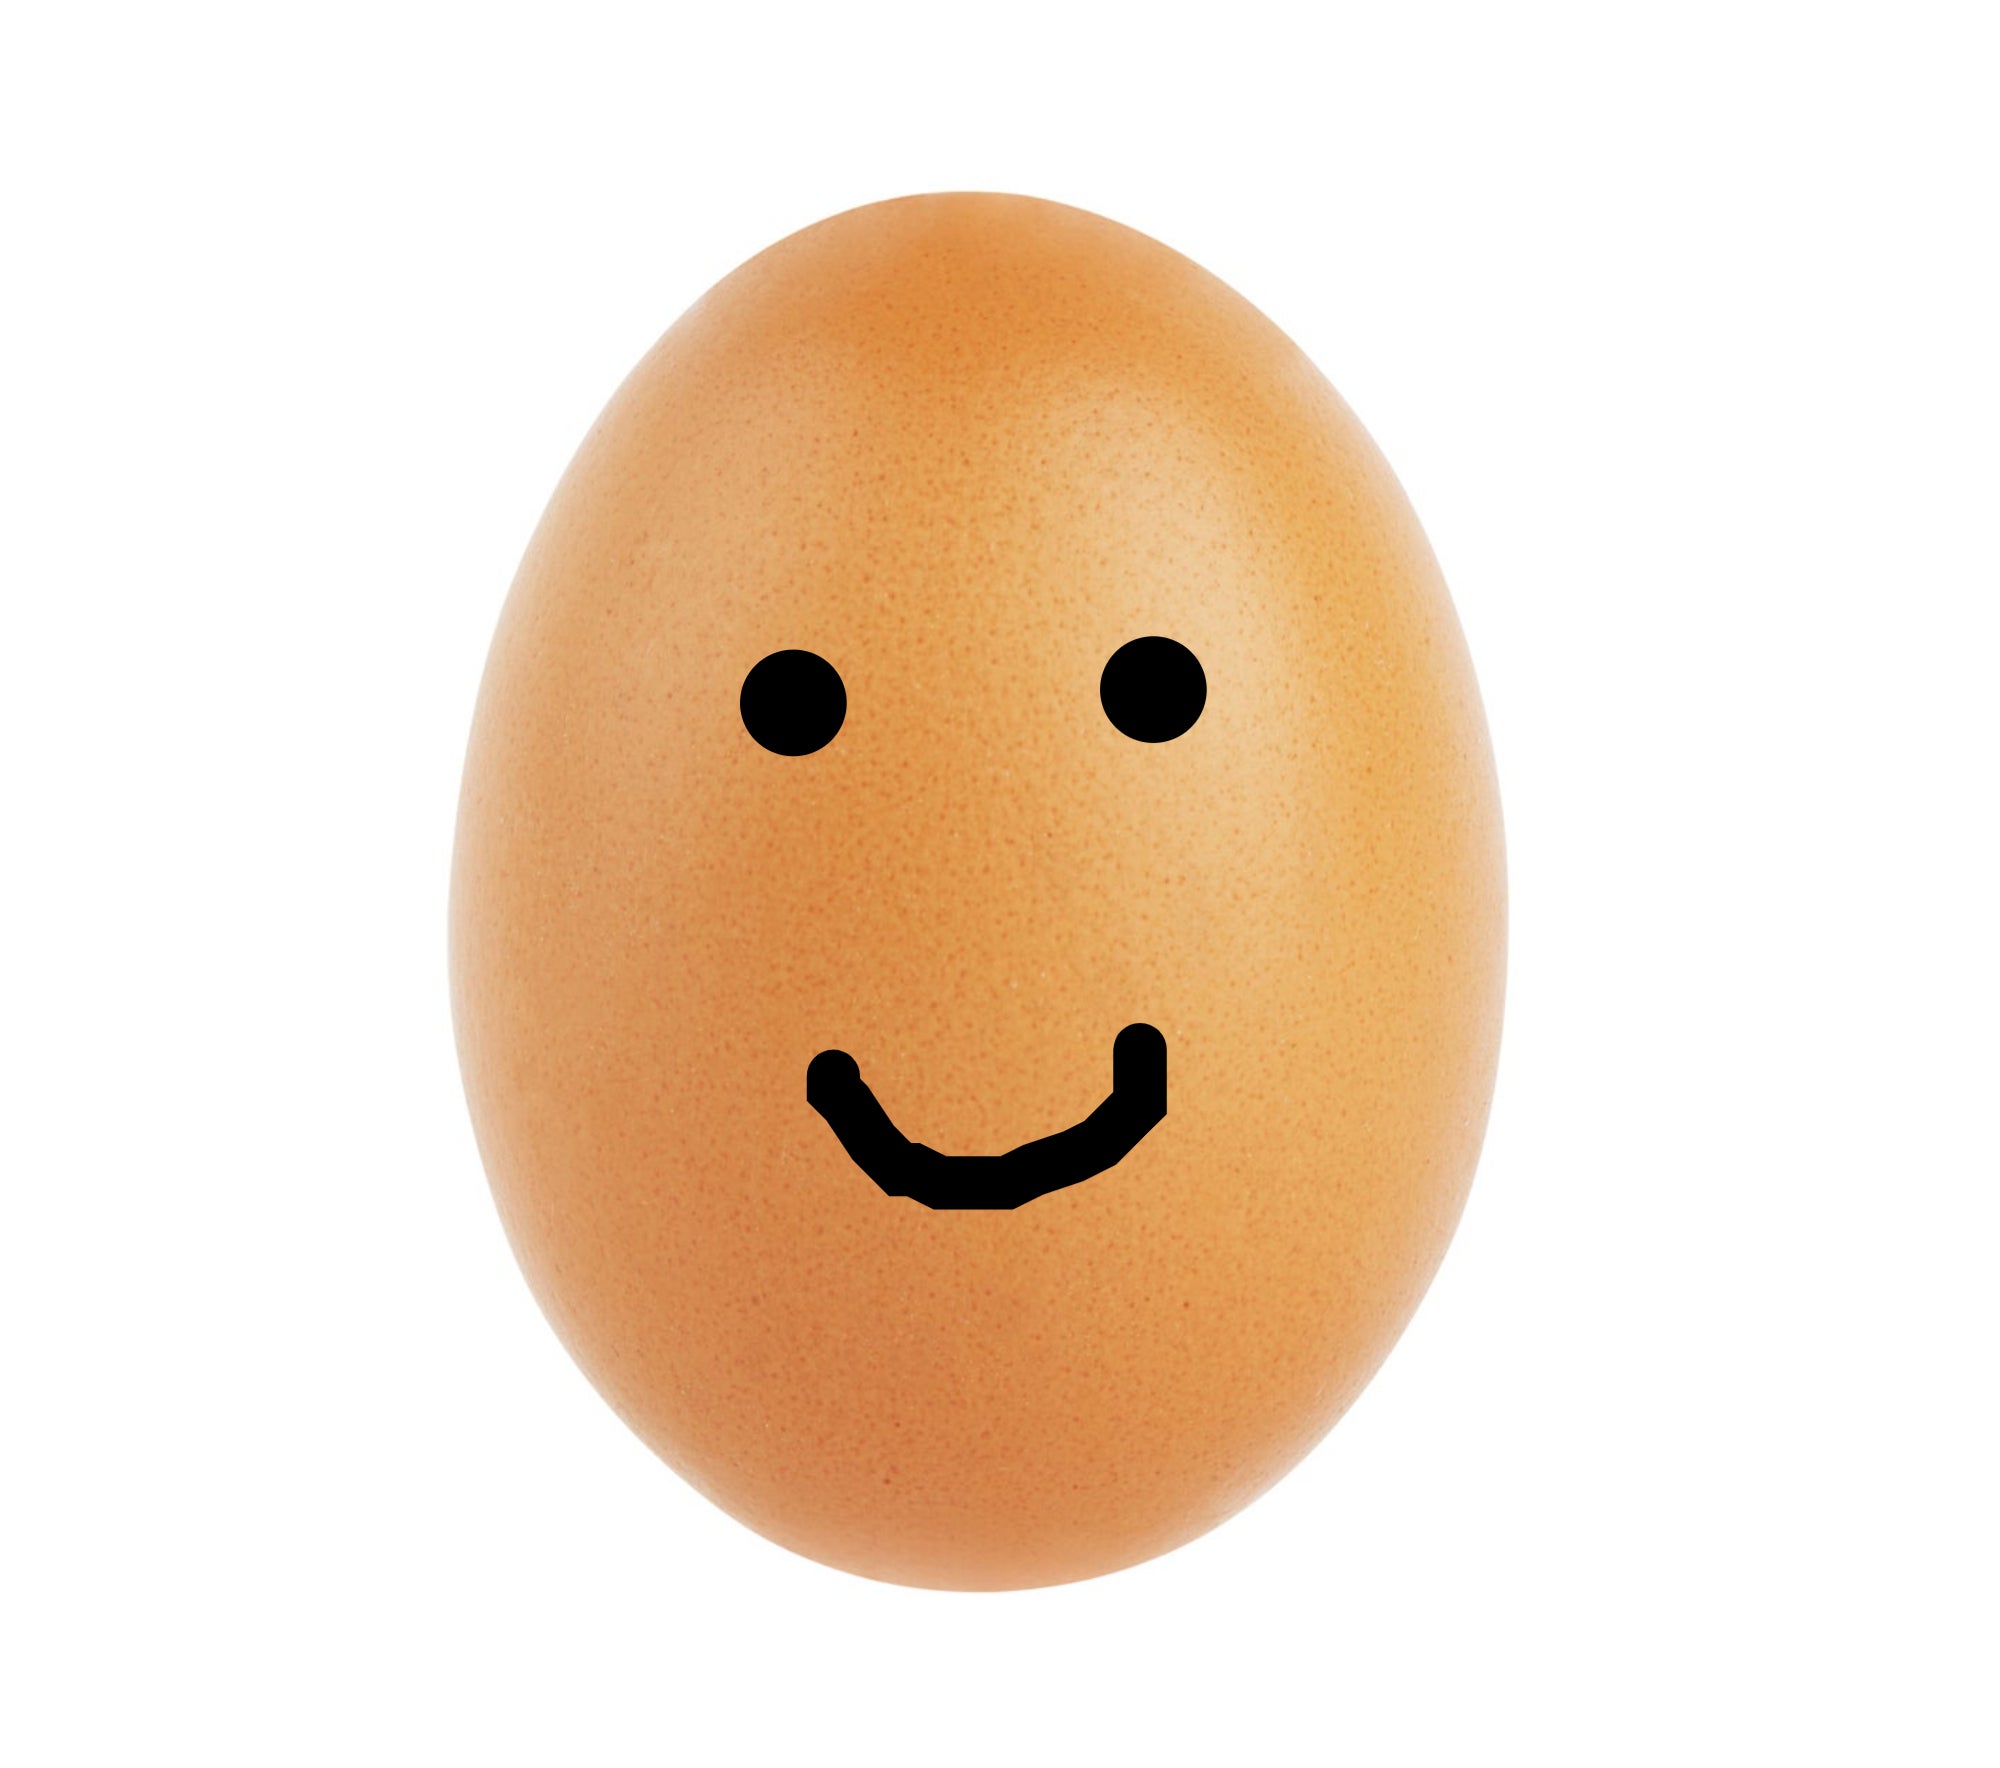 A single brown chicken egg isolated on a white background with a smiley face drawn on